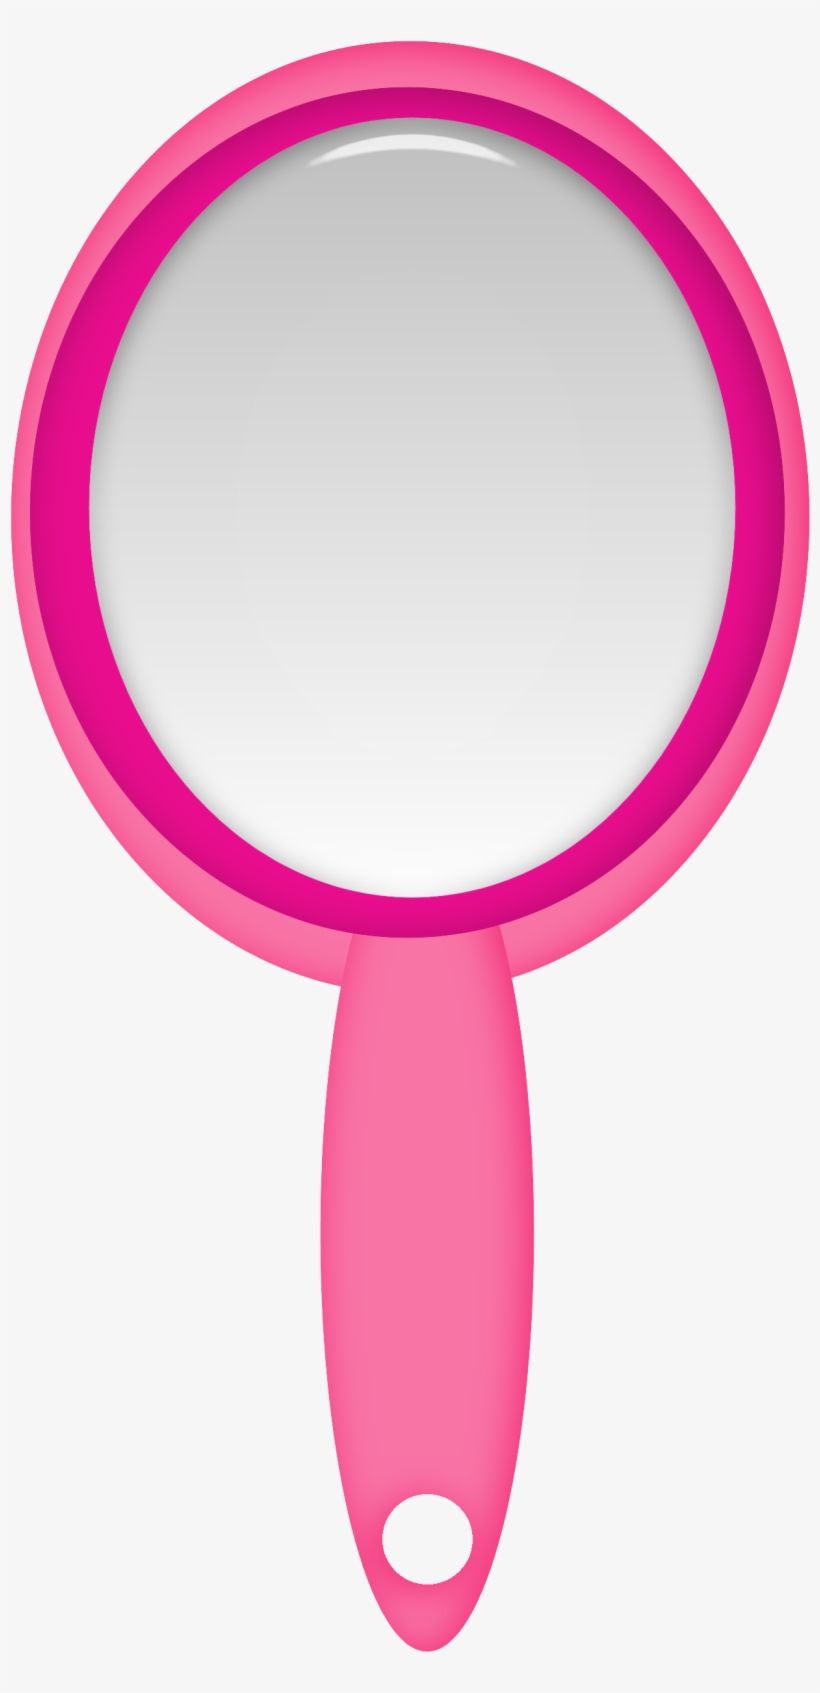 Mirror Clipart Girly - Fun Mirror Clipart, transparent png #1396316